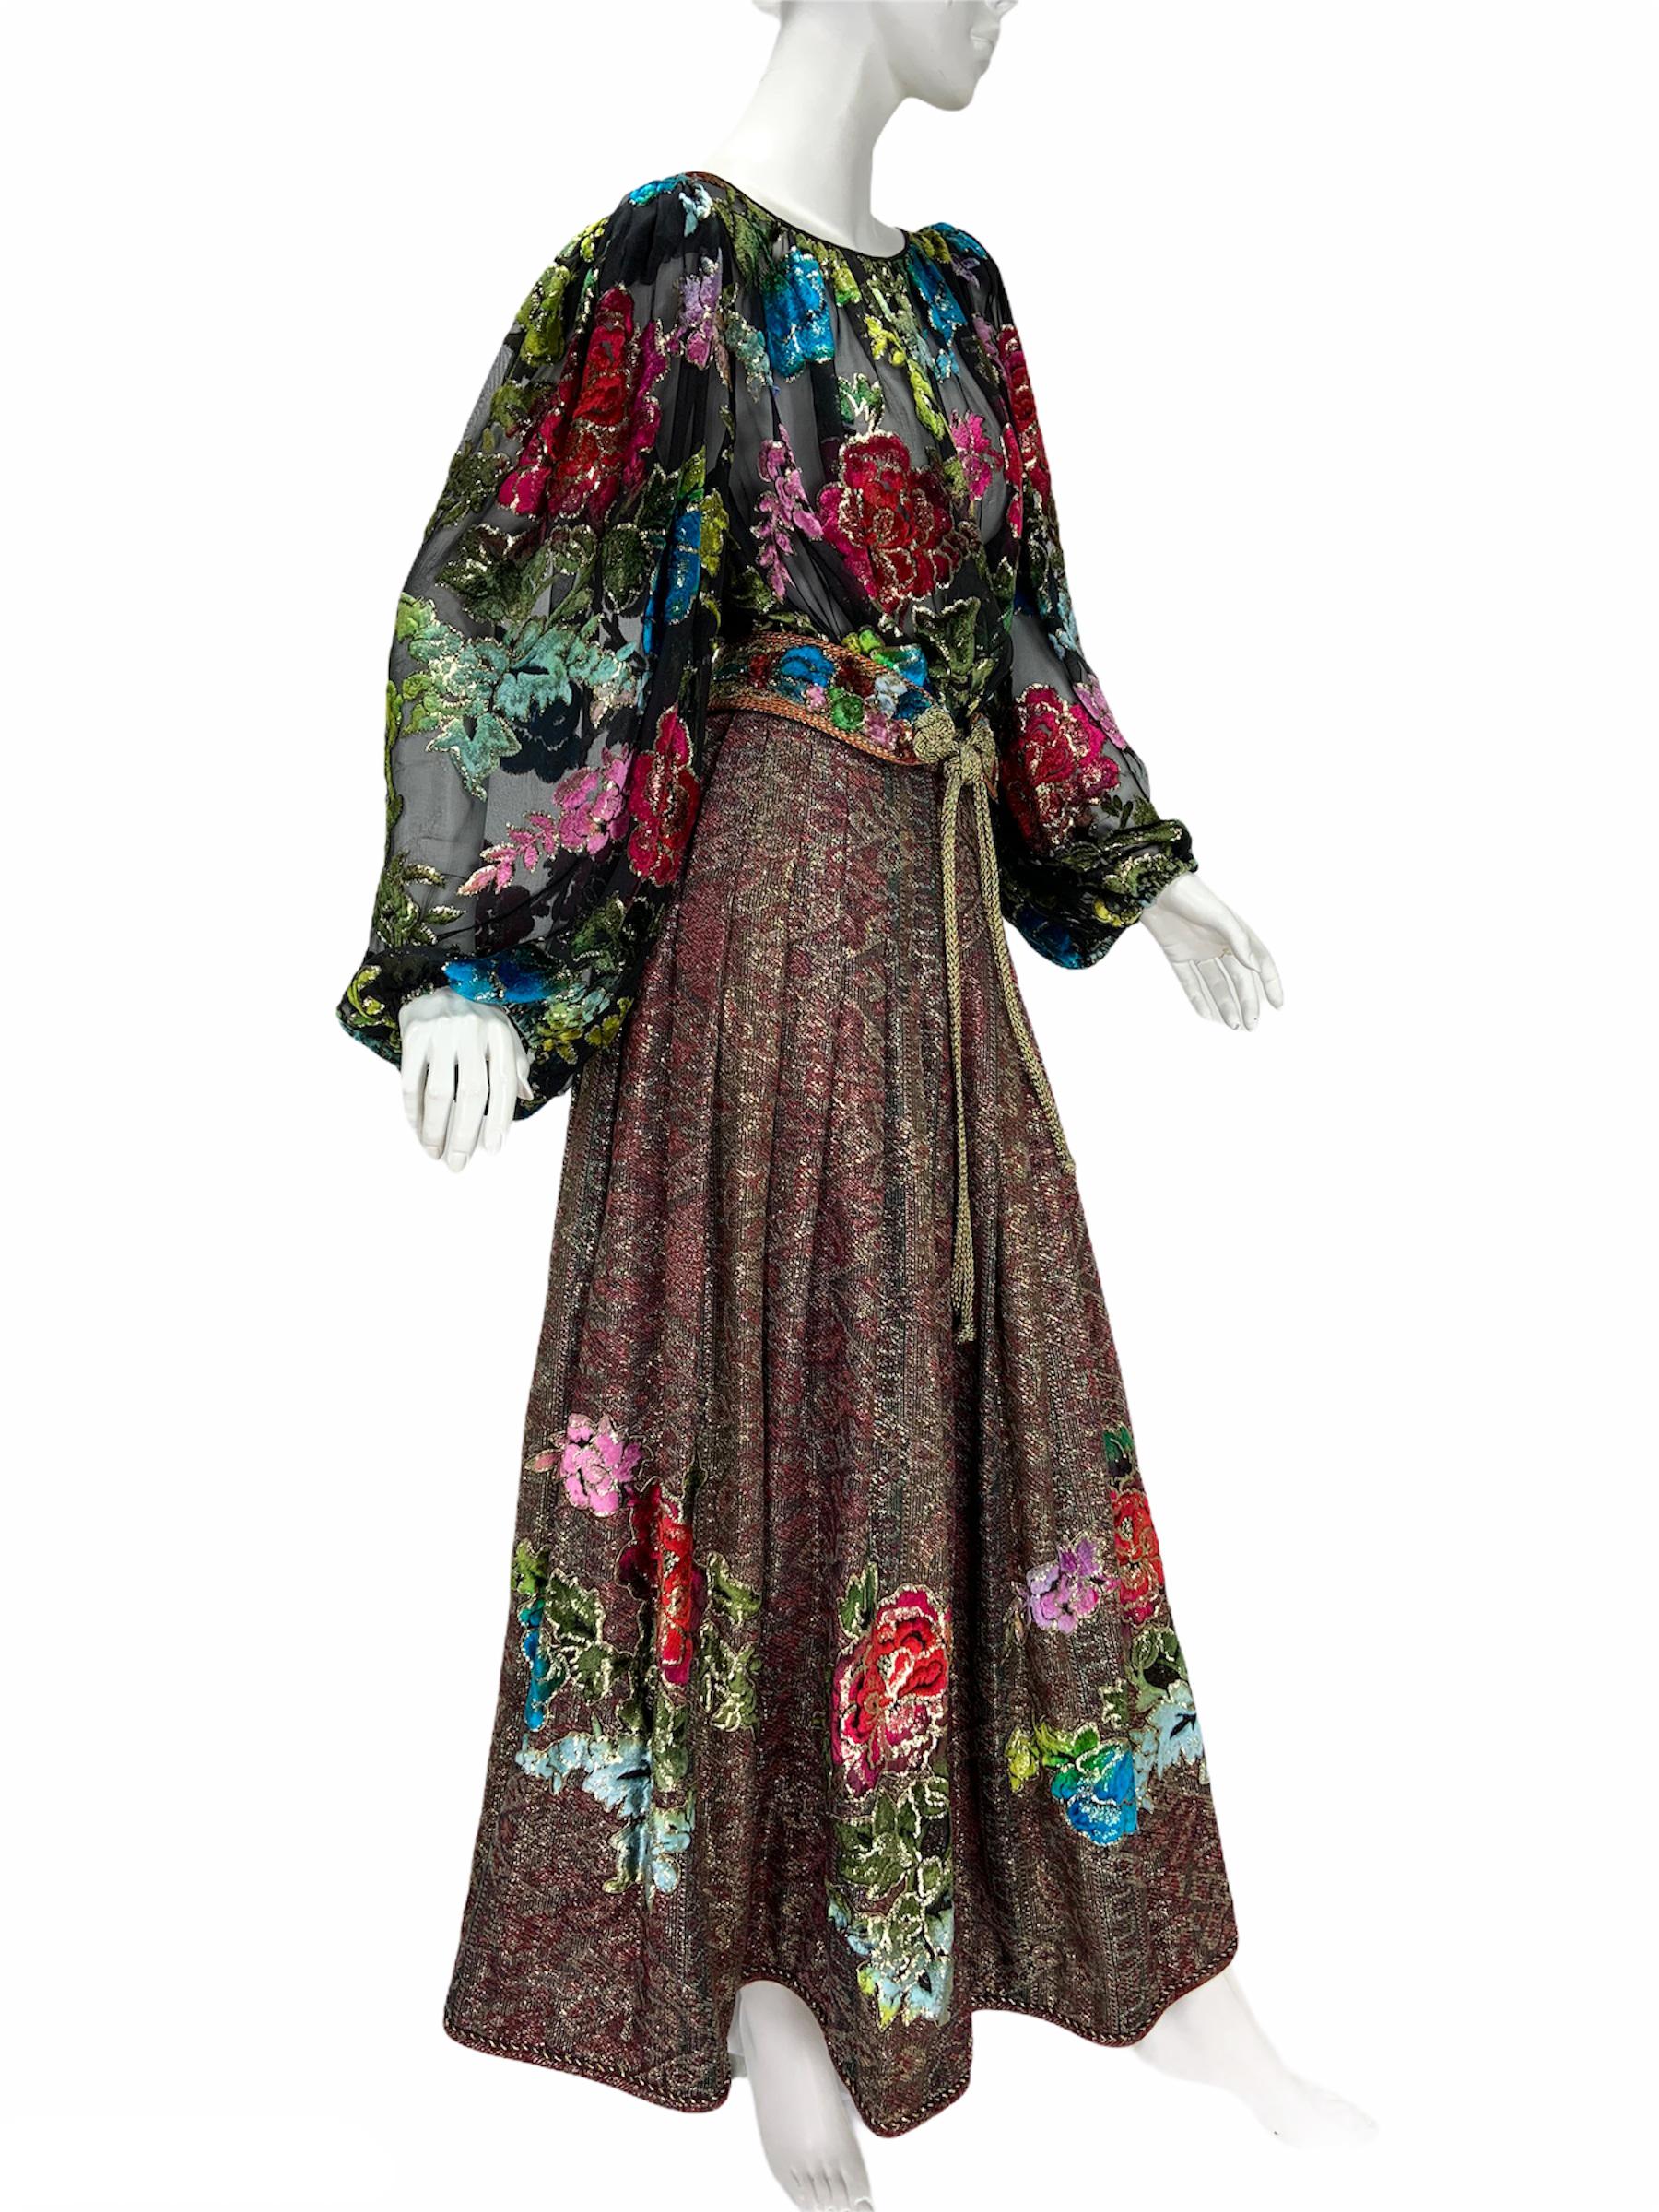 Vintage Oscar De La Renta for Neiman Marcus Skirt Suit with Belt
F/W 1984 Runway Collection
Designer size - US 8
Blouse - Black Sheer Silk with Multi-color Velvet & Lurex Flowers, Pleated for Oversize Look, Flowing Sleeves with Elasticized Wrists,